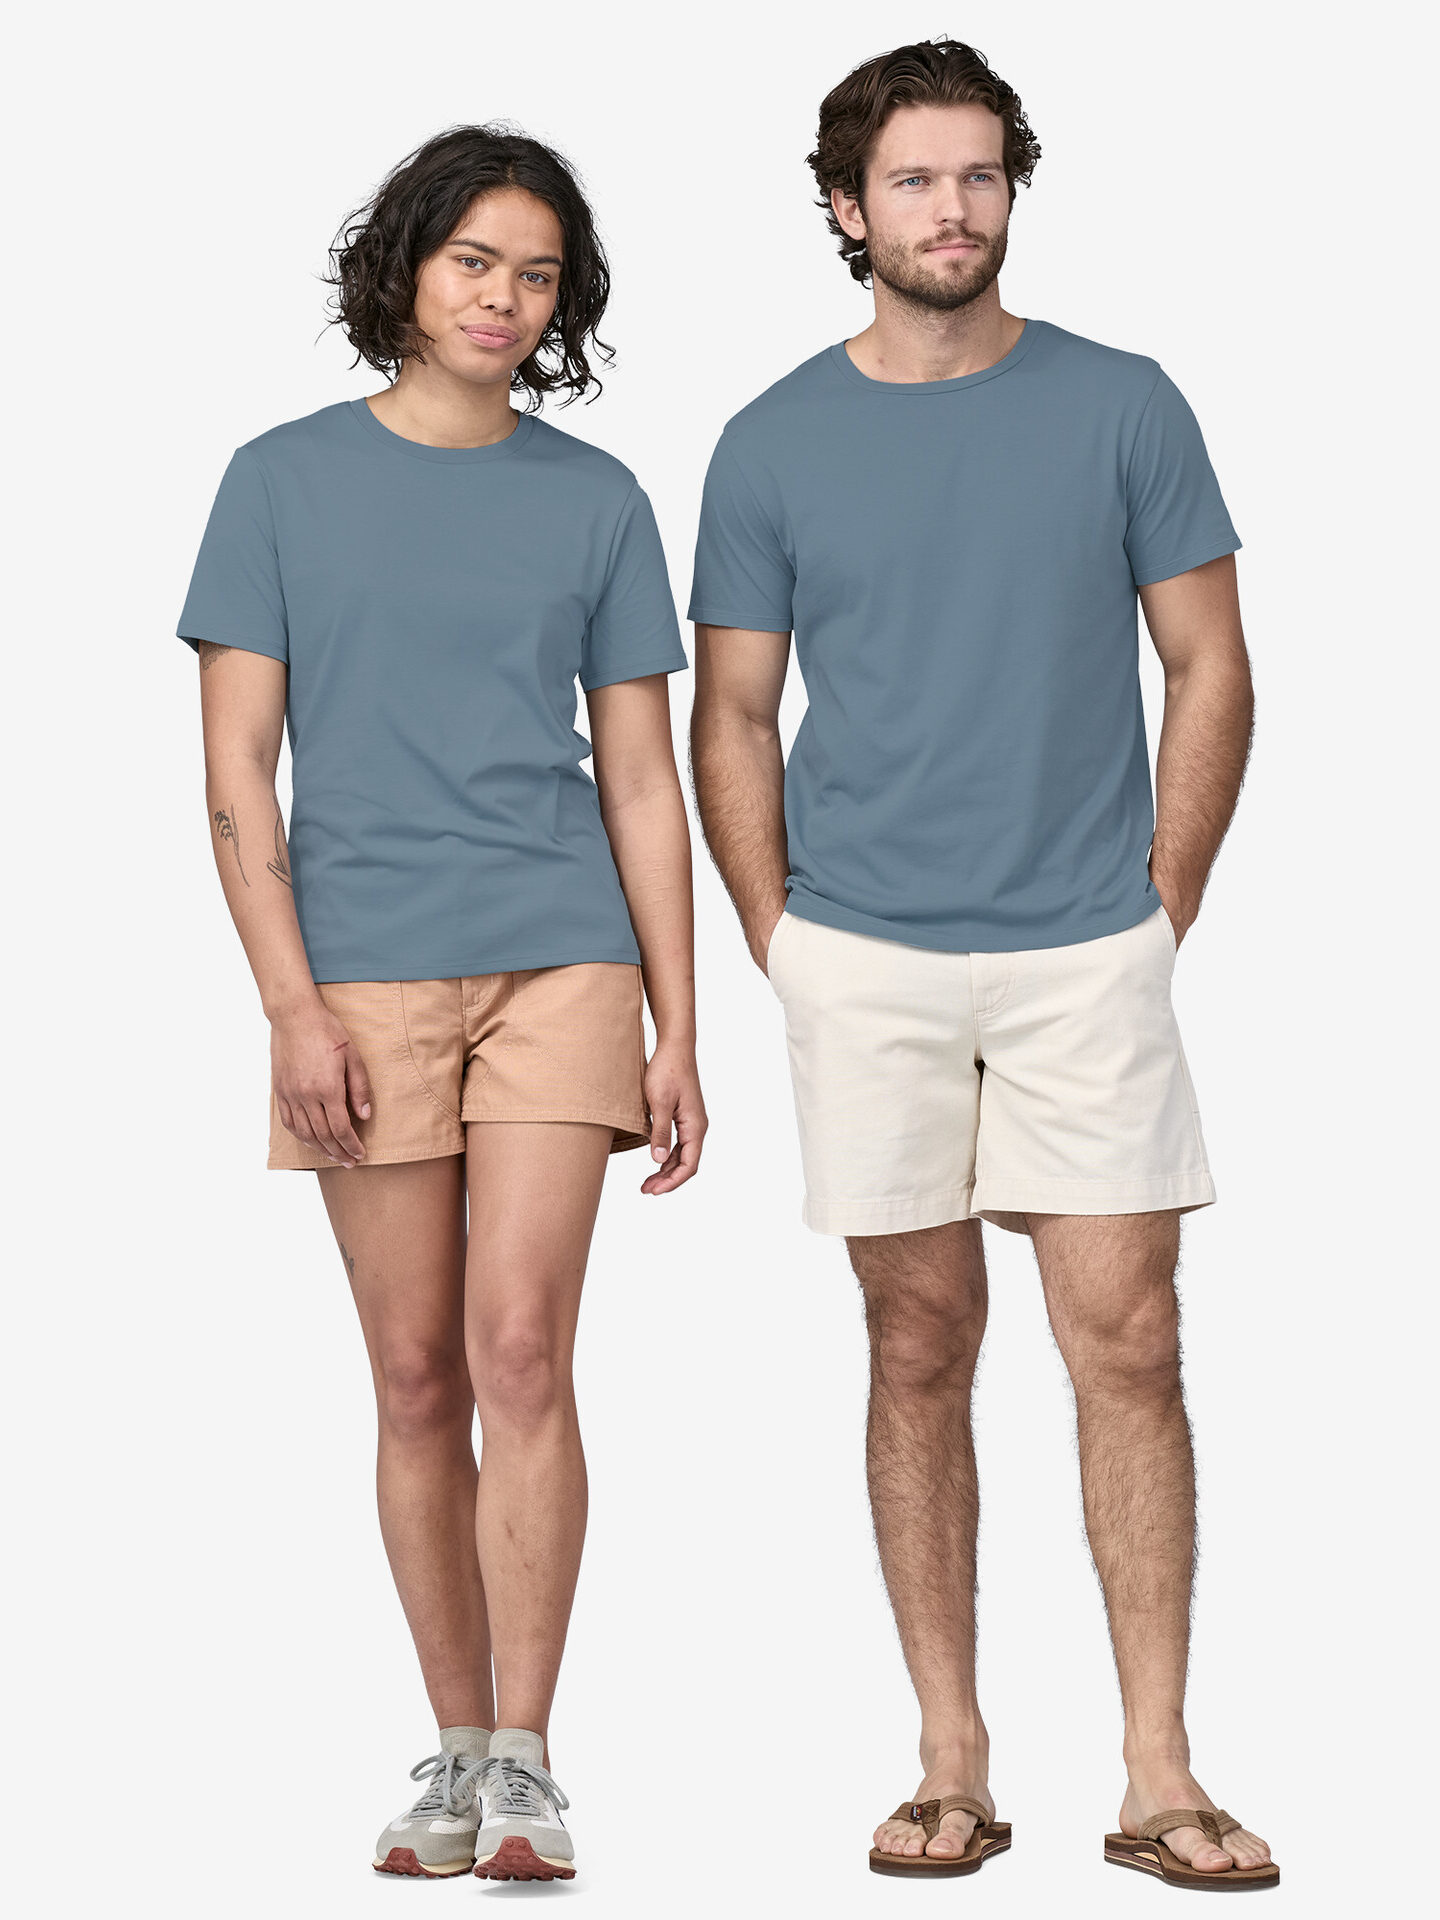 A man and a woman standing side by side, wearing plain blue t-shirts and shorts, looking directly at the camera with neutral expressions.